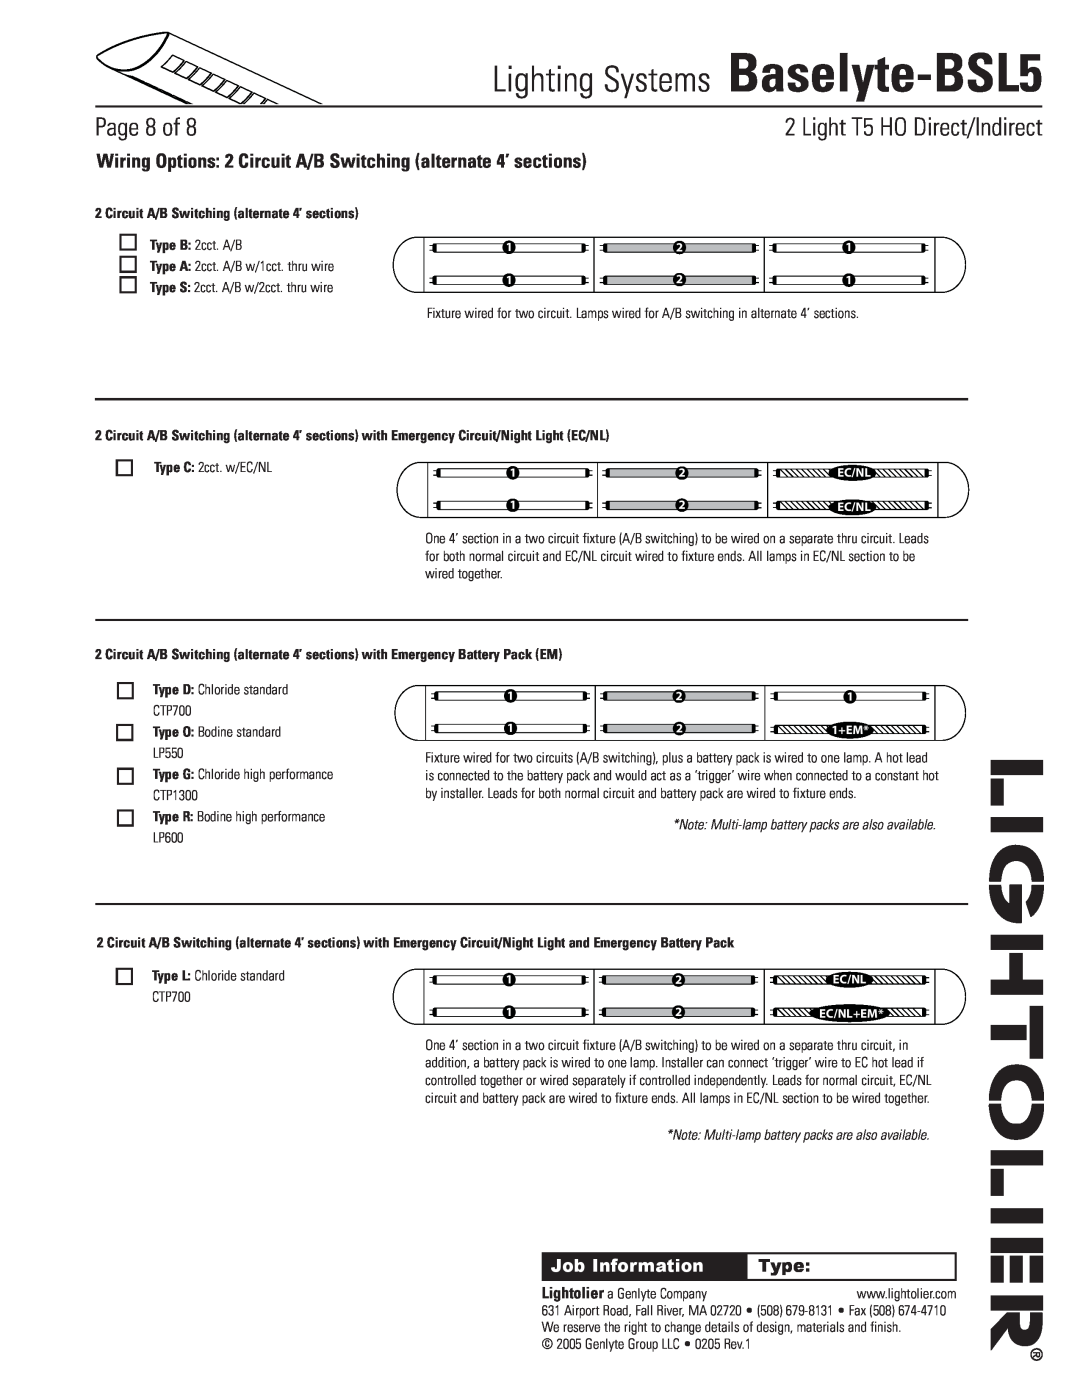 Lightolier Baselyte-BSL5 specifications Circuit A/B Switching alternate 4’ sections, Type O Bodine standard LP550, Page of 